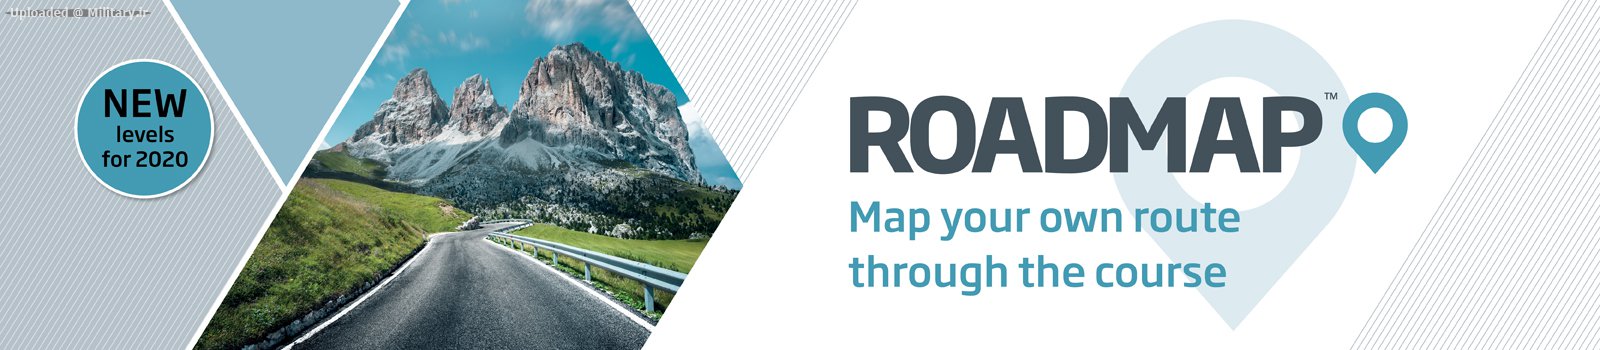 Roadmap_map_your_own_route_1600x350.jpg